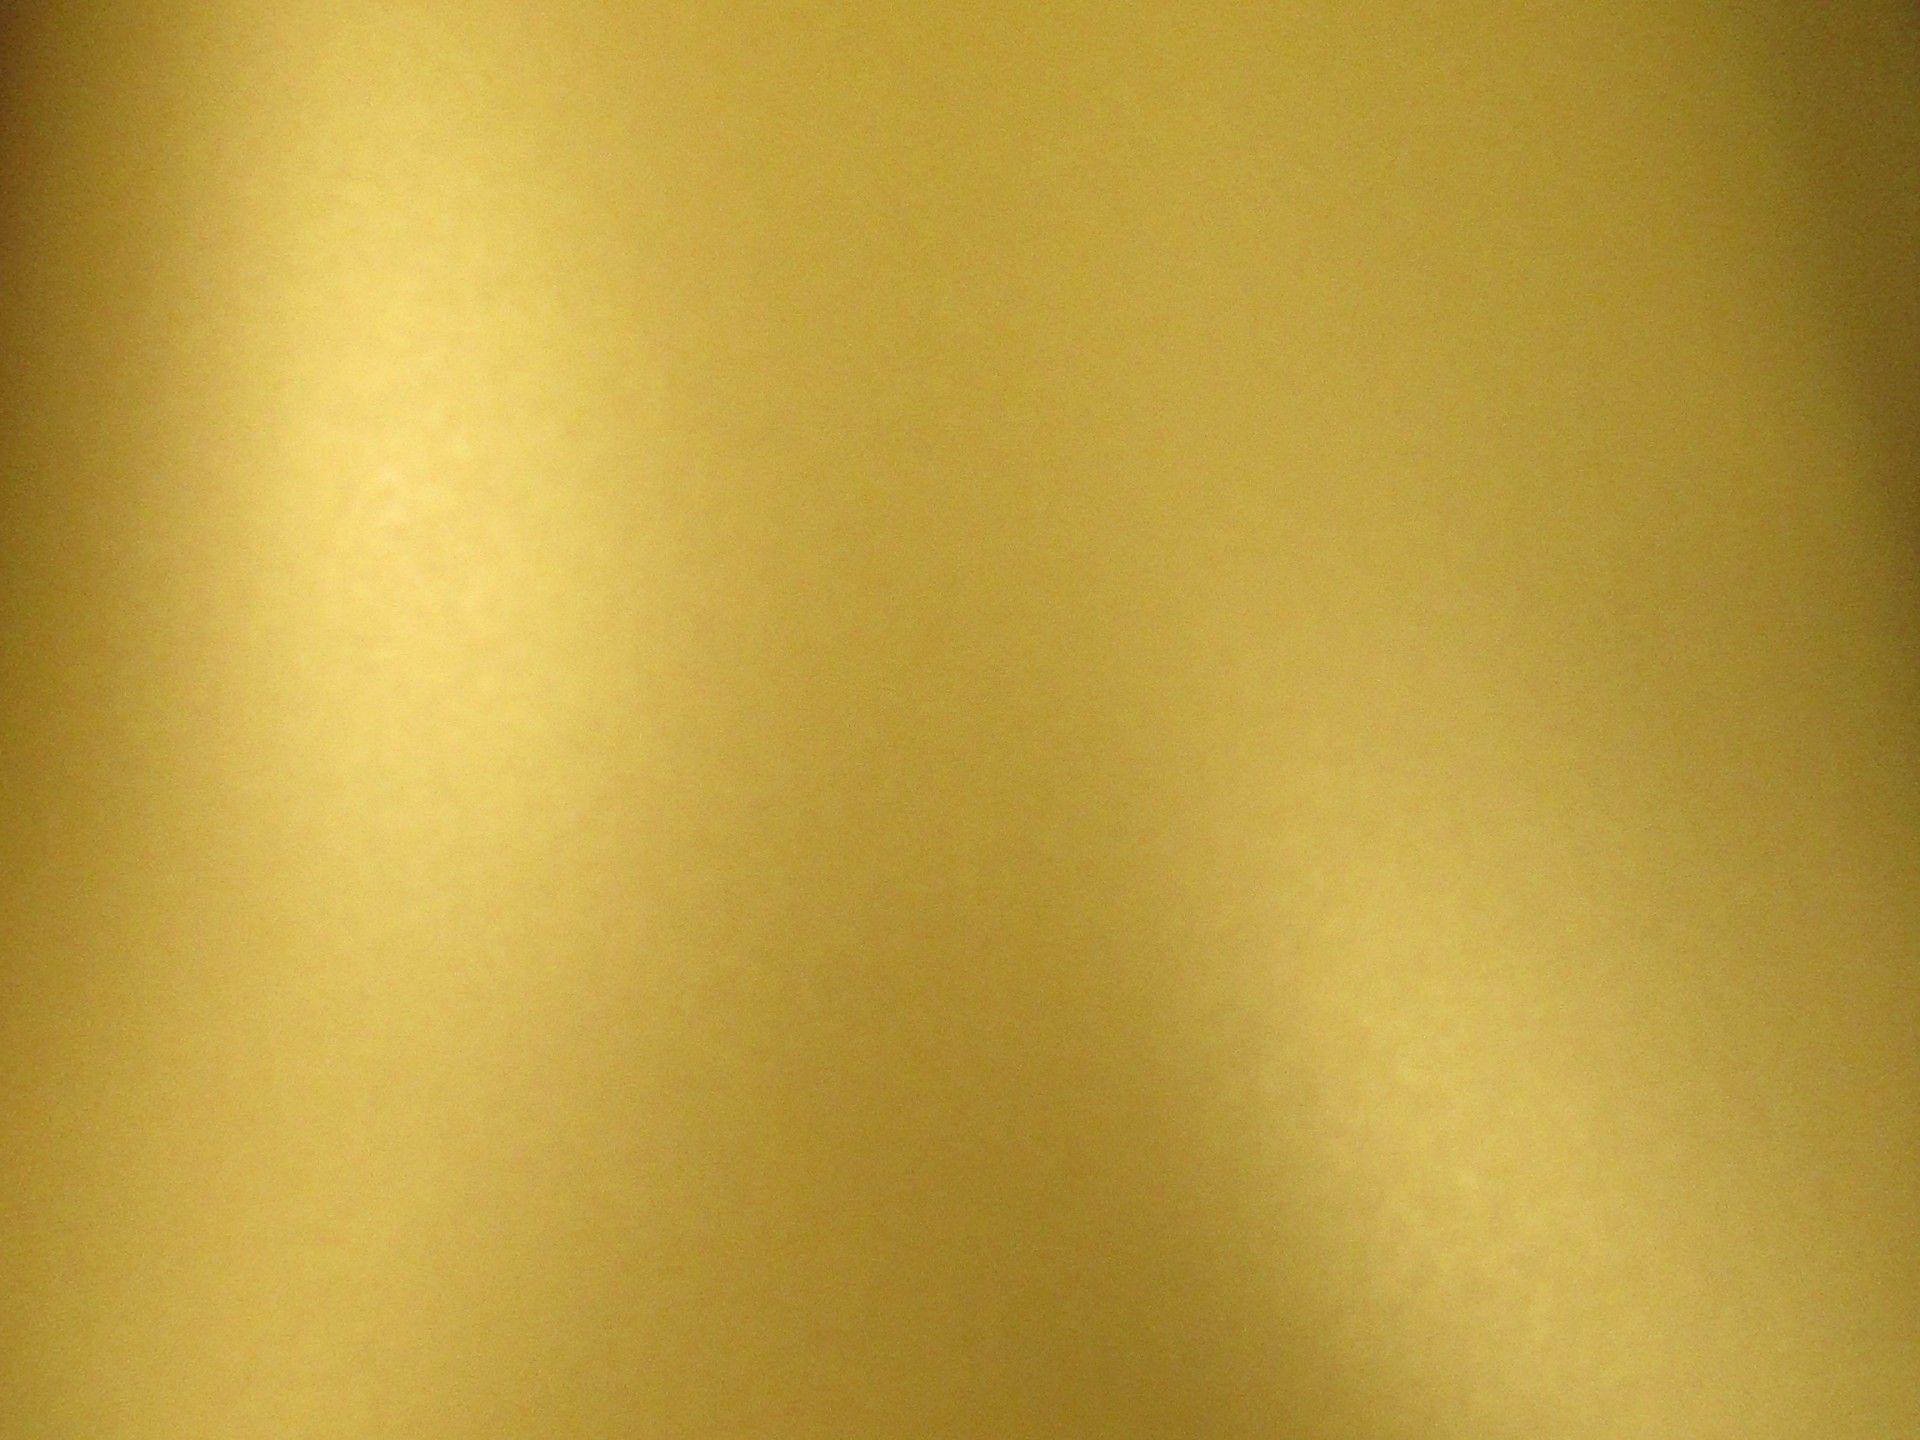 Shiny Gold backgroundDownload free awesome background